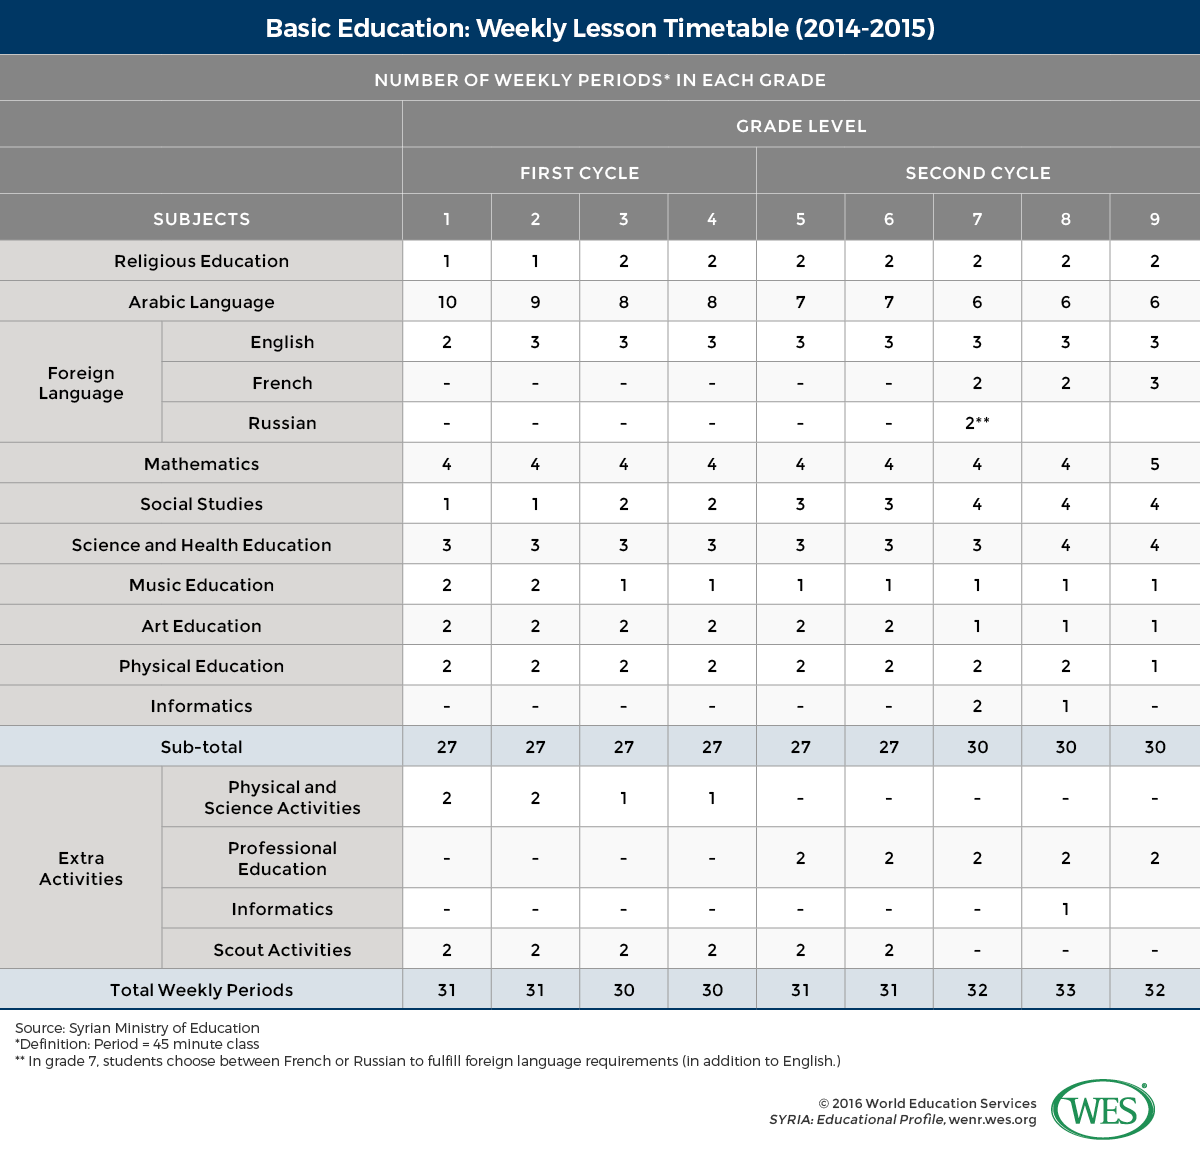 A table showing weekly lesson timetable for basic education in Syria in 2014/15. 